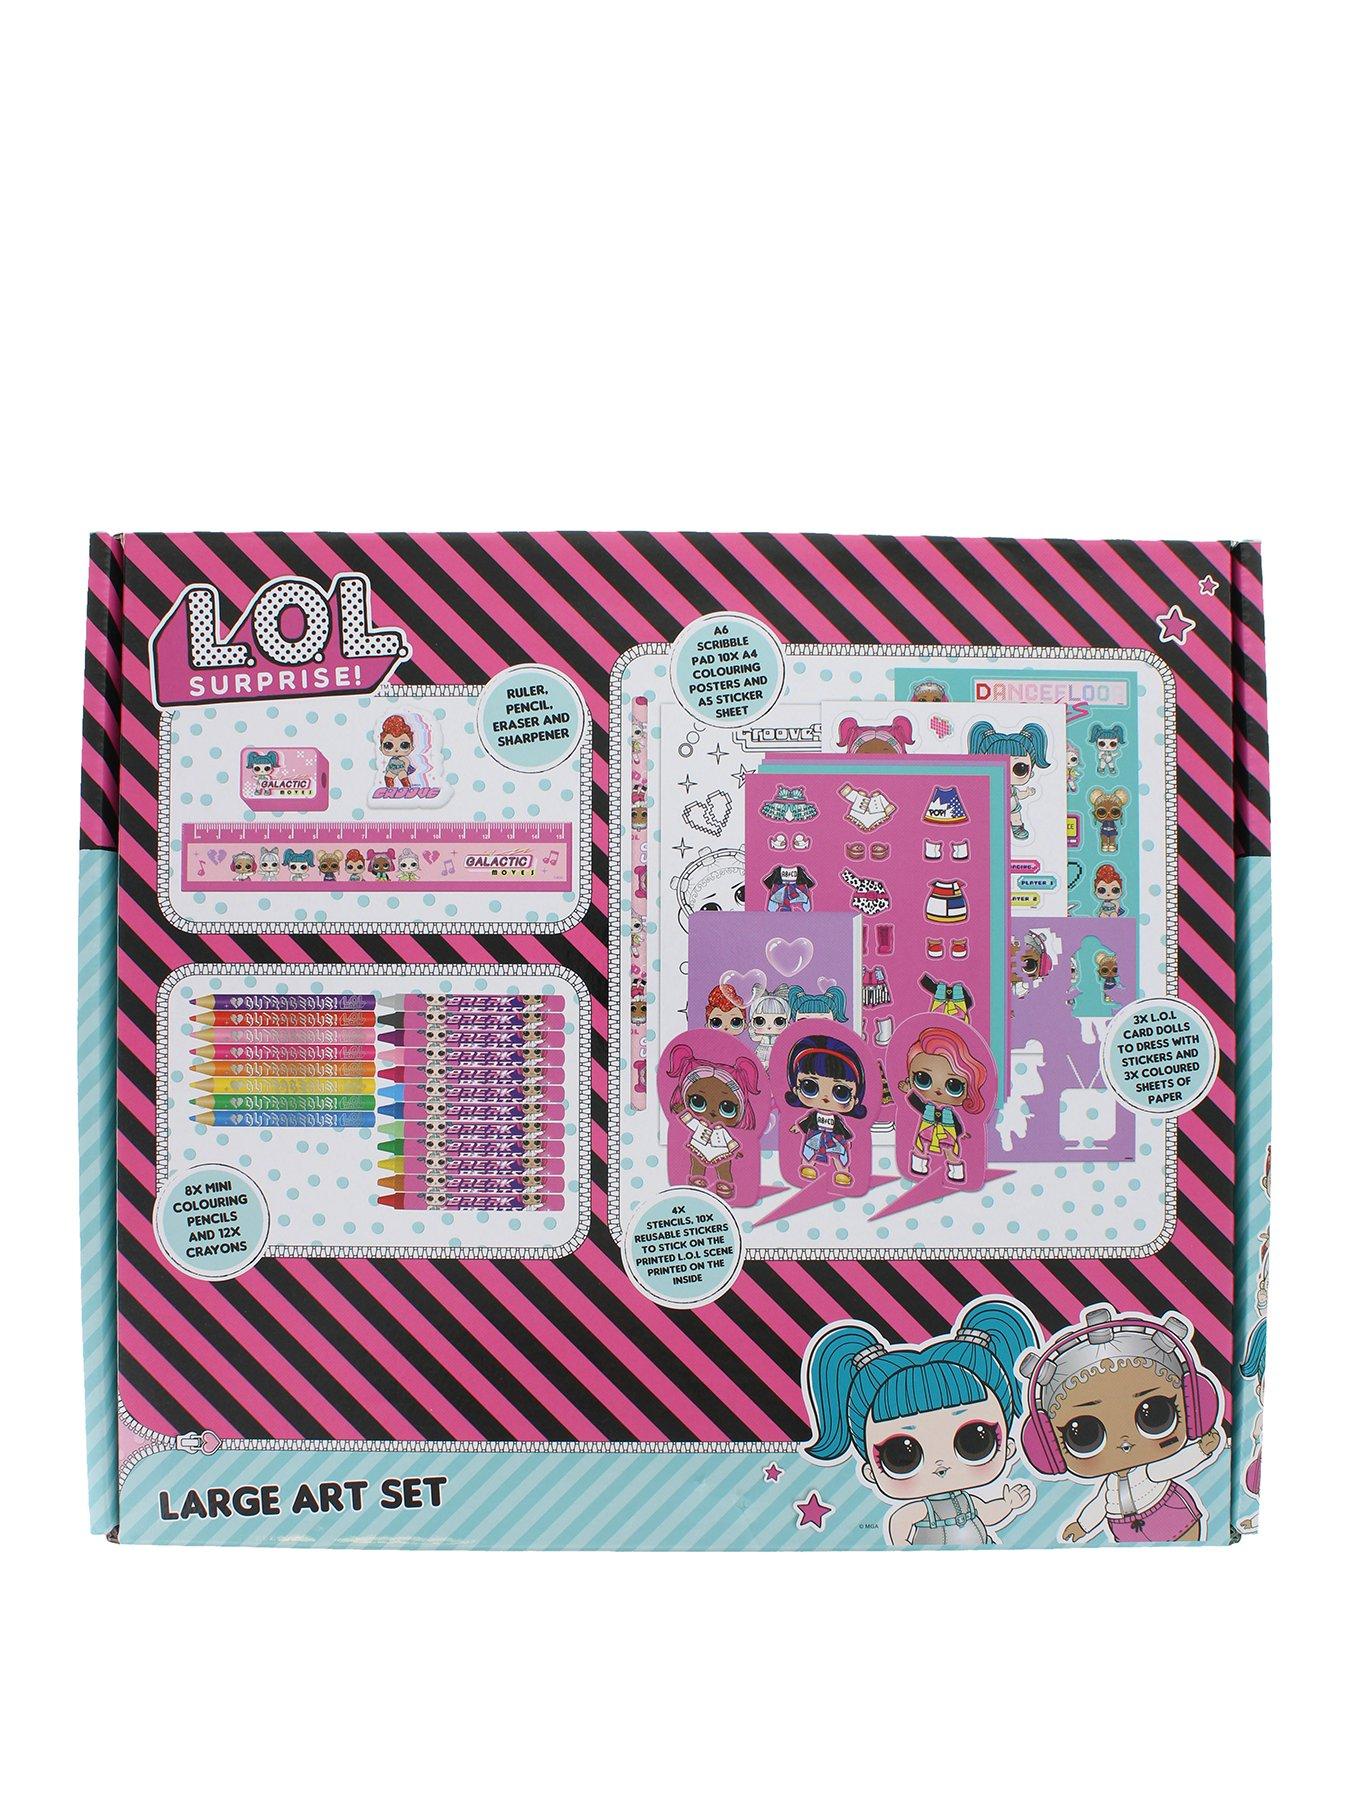 Lol Surprise Creativity Fun Kids Art Set for Coloring, Painting, and Crafts